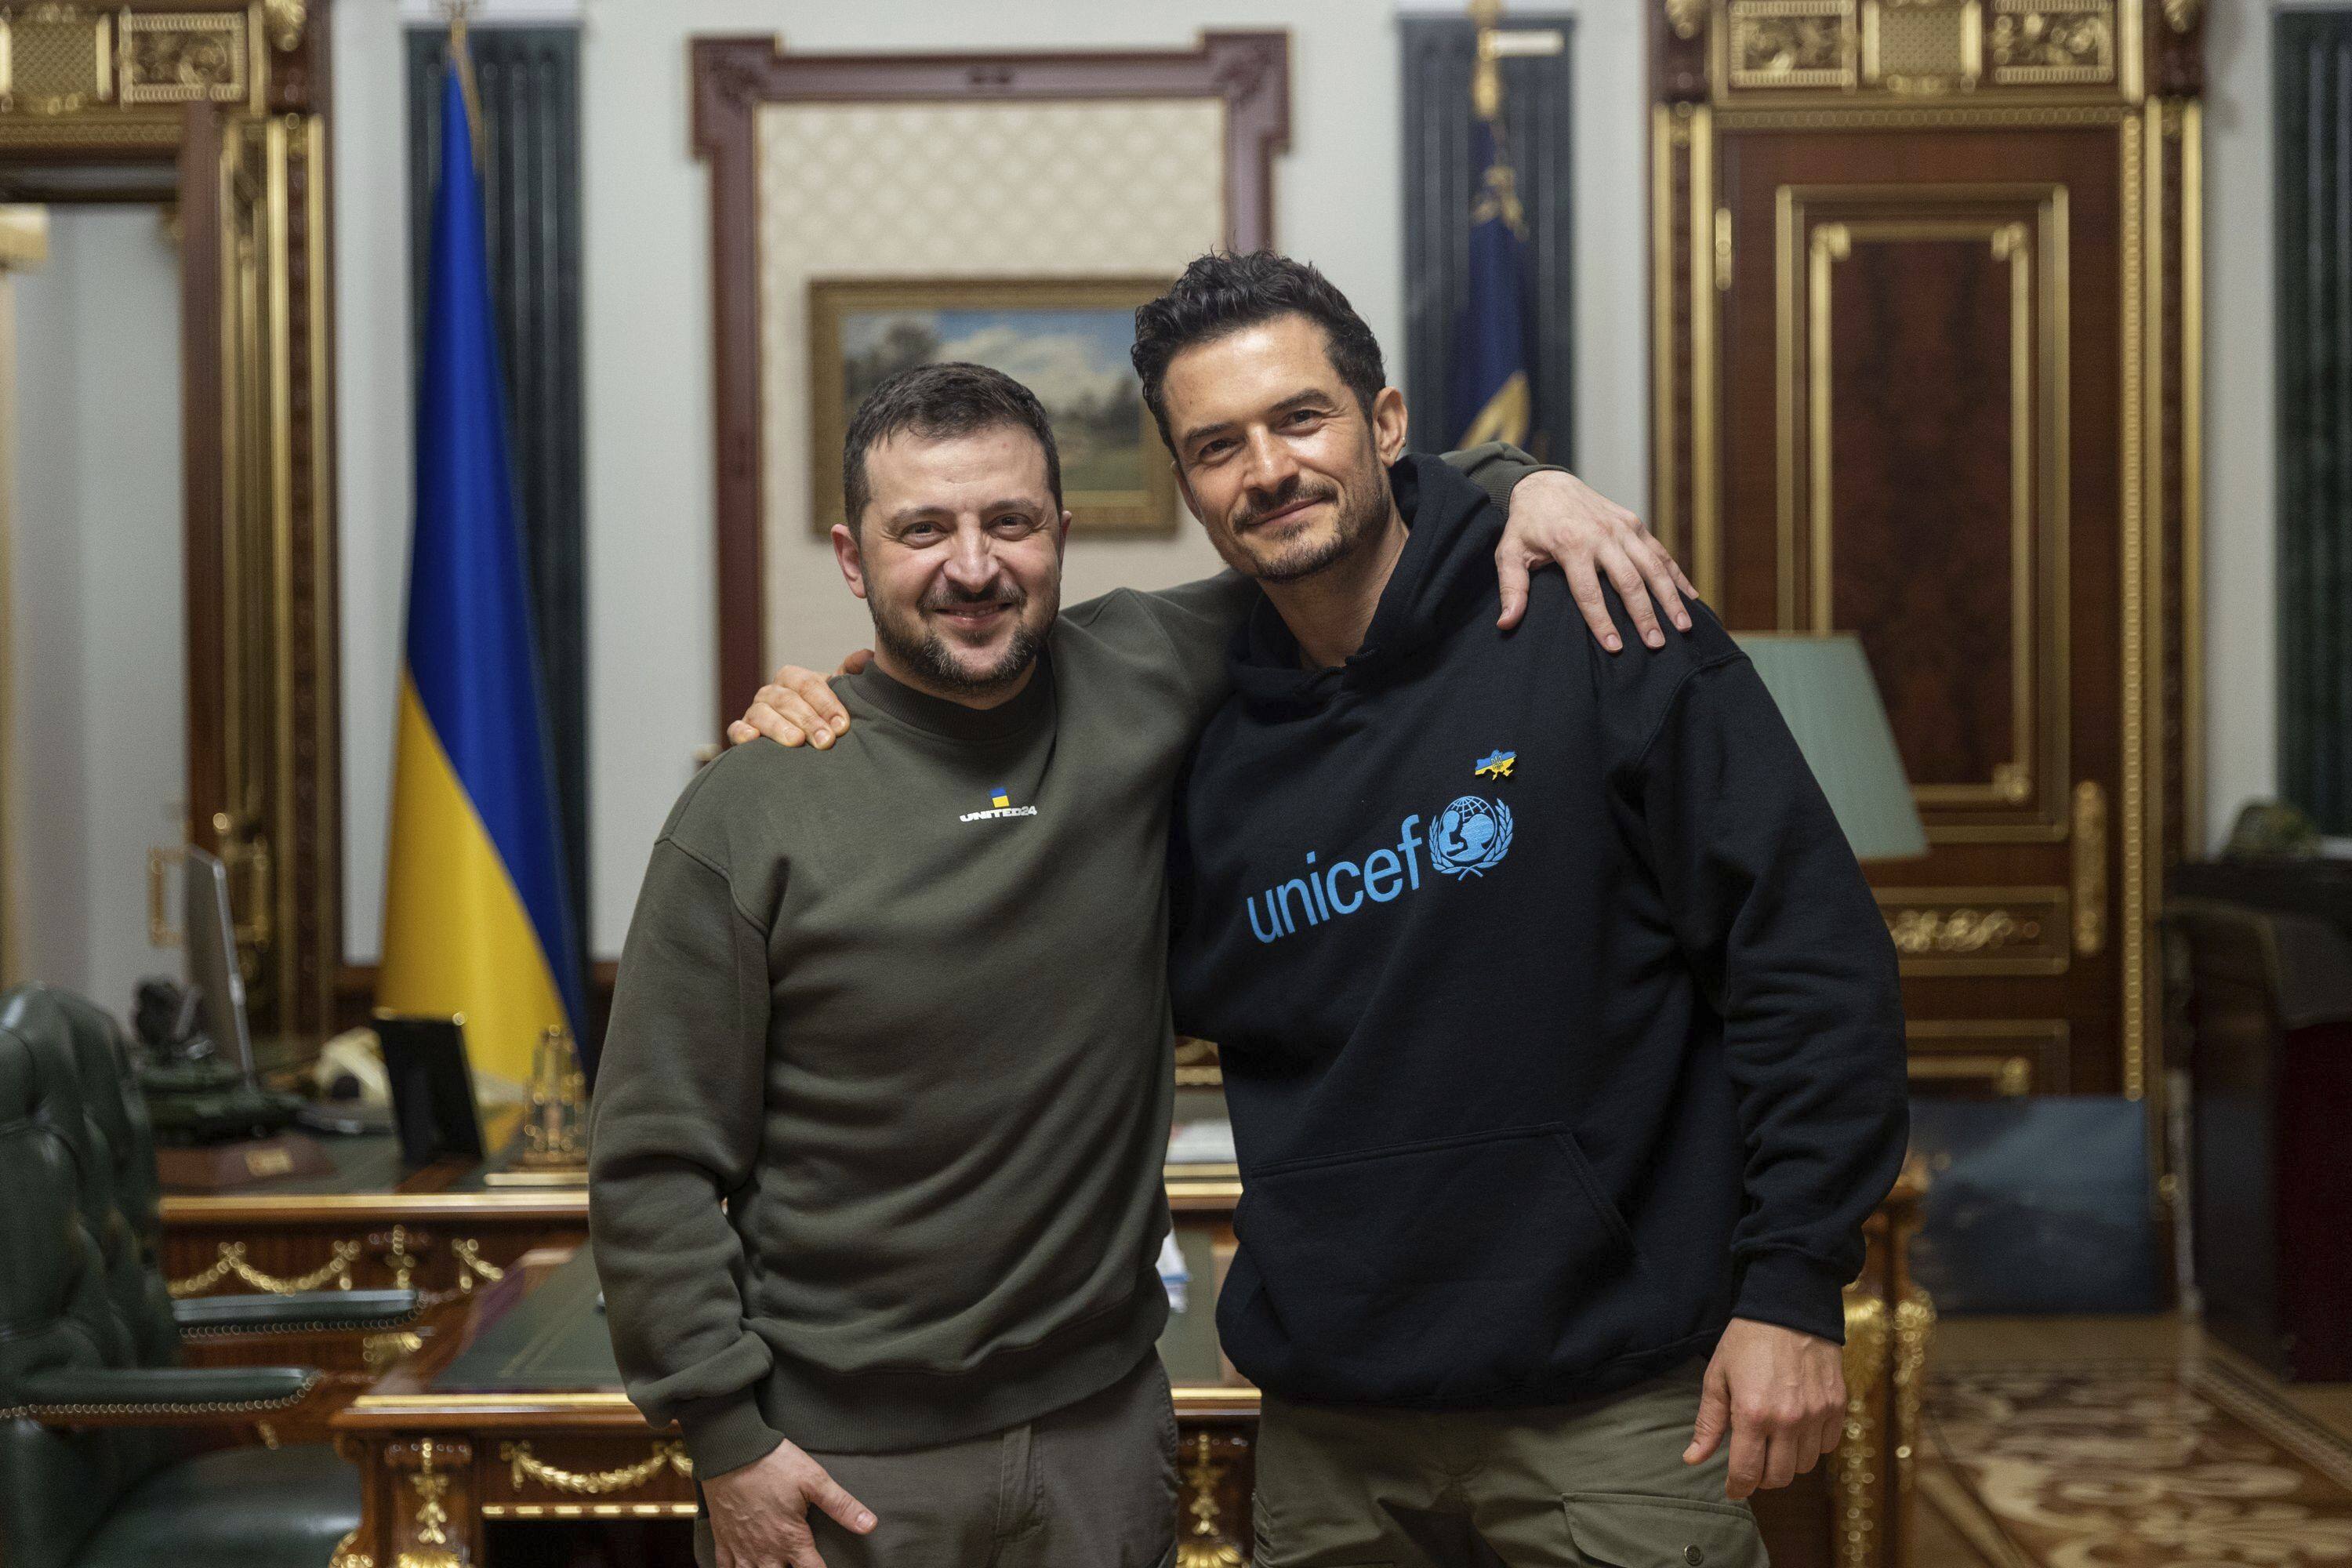 Ukrainian President Volodymyr Zelensky (left) poses for photo with British actor and Unicef Goodwill Ambassador Orlando Bloom during their meeting in Kyiv on March 26, 2023. Bloom has been a Unicef ambassador for humanitarian projects since 2009. Photo: via AP